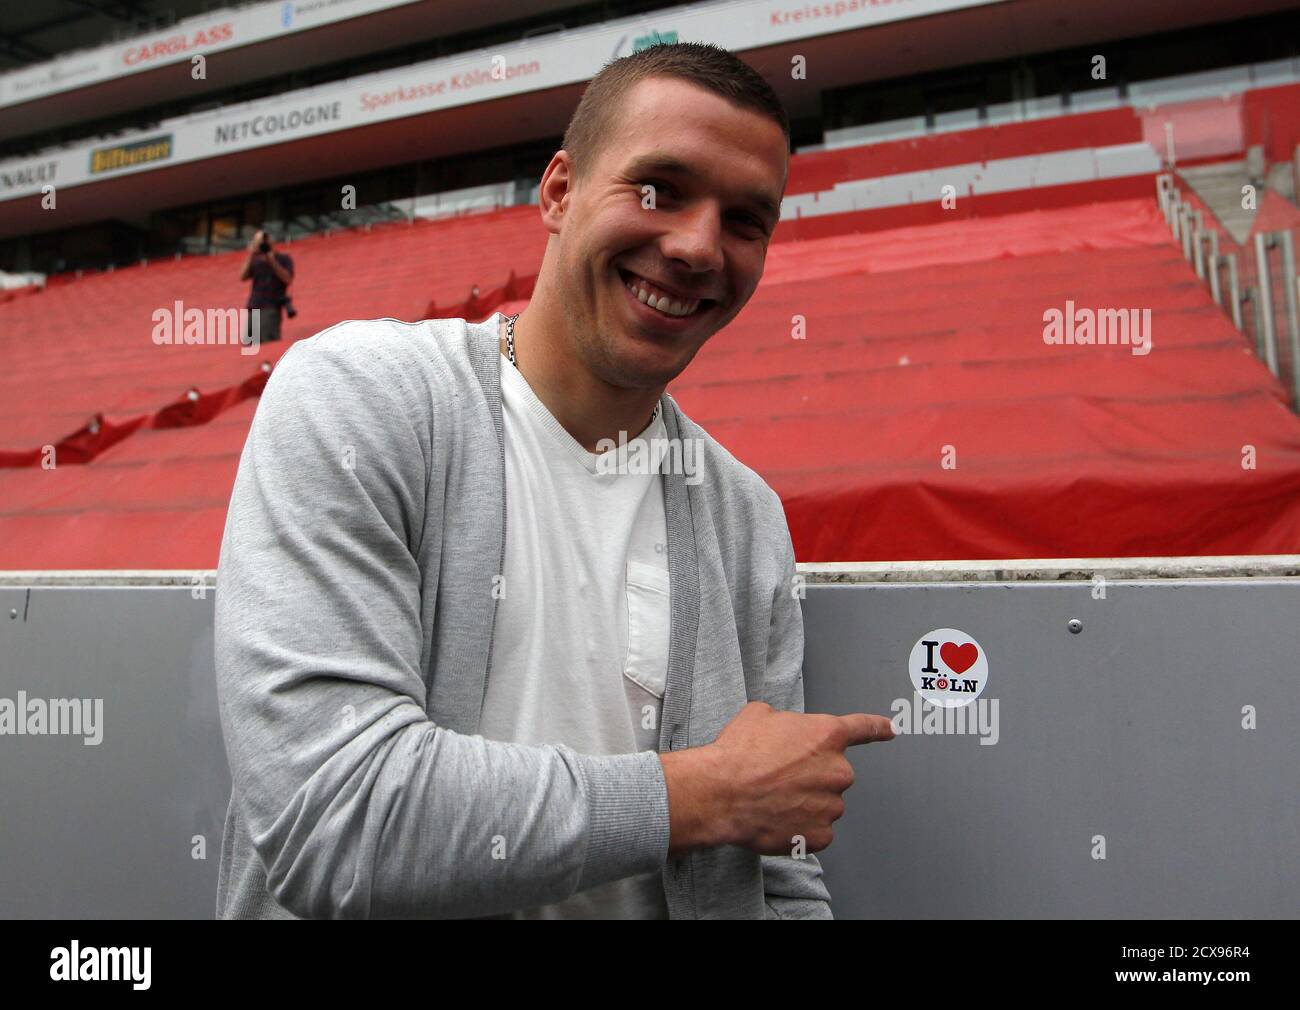 Cologne's Lukas Podolski poses next to a sticker 'I love Cologne' after a news conference in Cologne May 2, 2012. Cologne and Germany winger Lukas Podolski will join Arsenal for next season, the Bundesliga club said on Monday.  Podolski had a year left on his Cologne contract. REUTERS/Ina Fassbender (GERMANY - Tags: SPORT SOCCER) Stock Photo